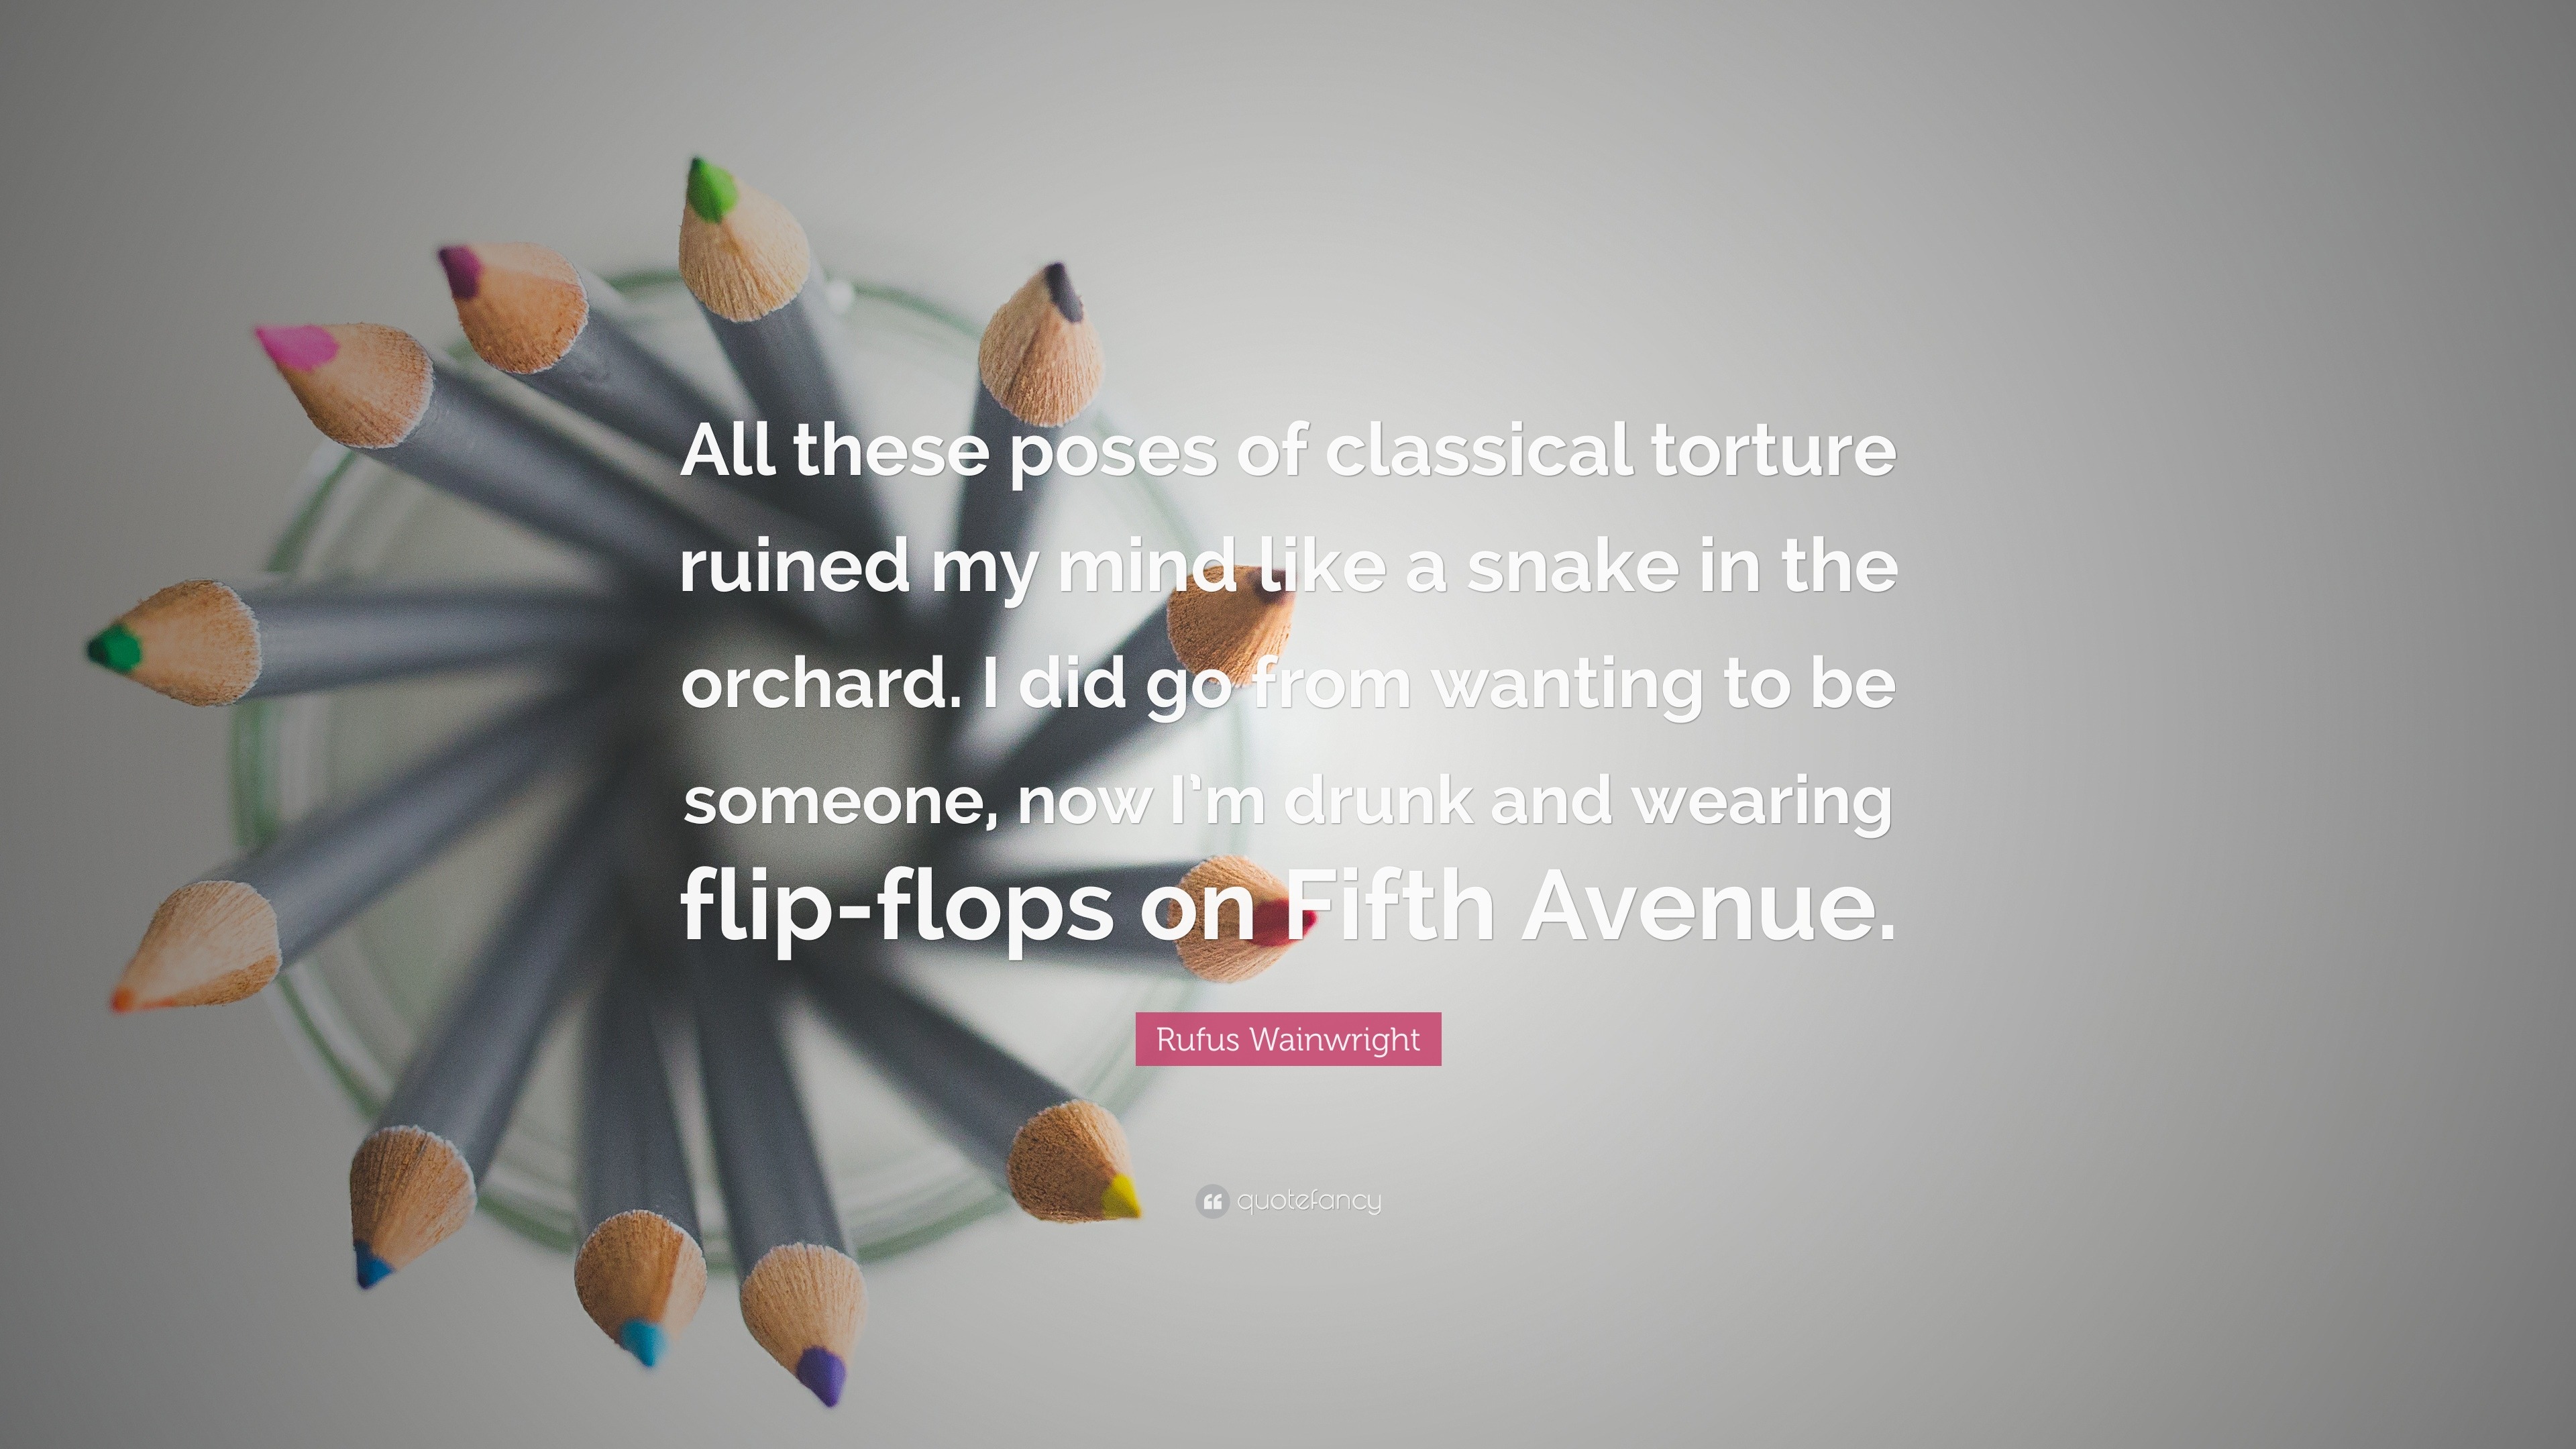 765909 Rufus Wainwright Quote All these poses of classical torture ruined